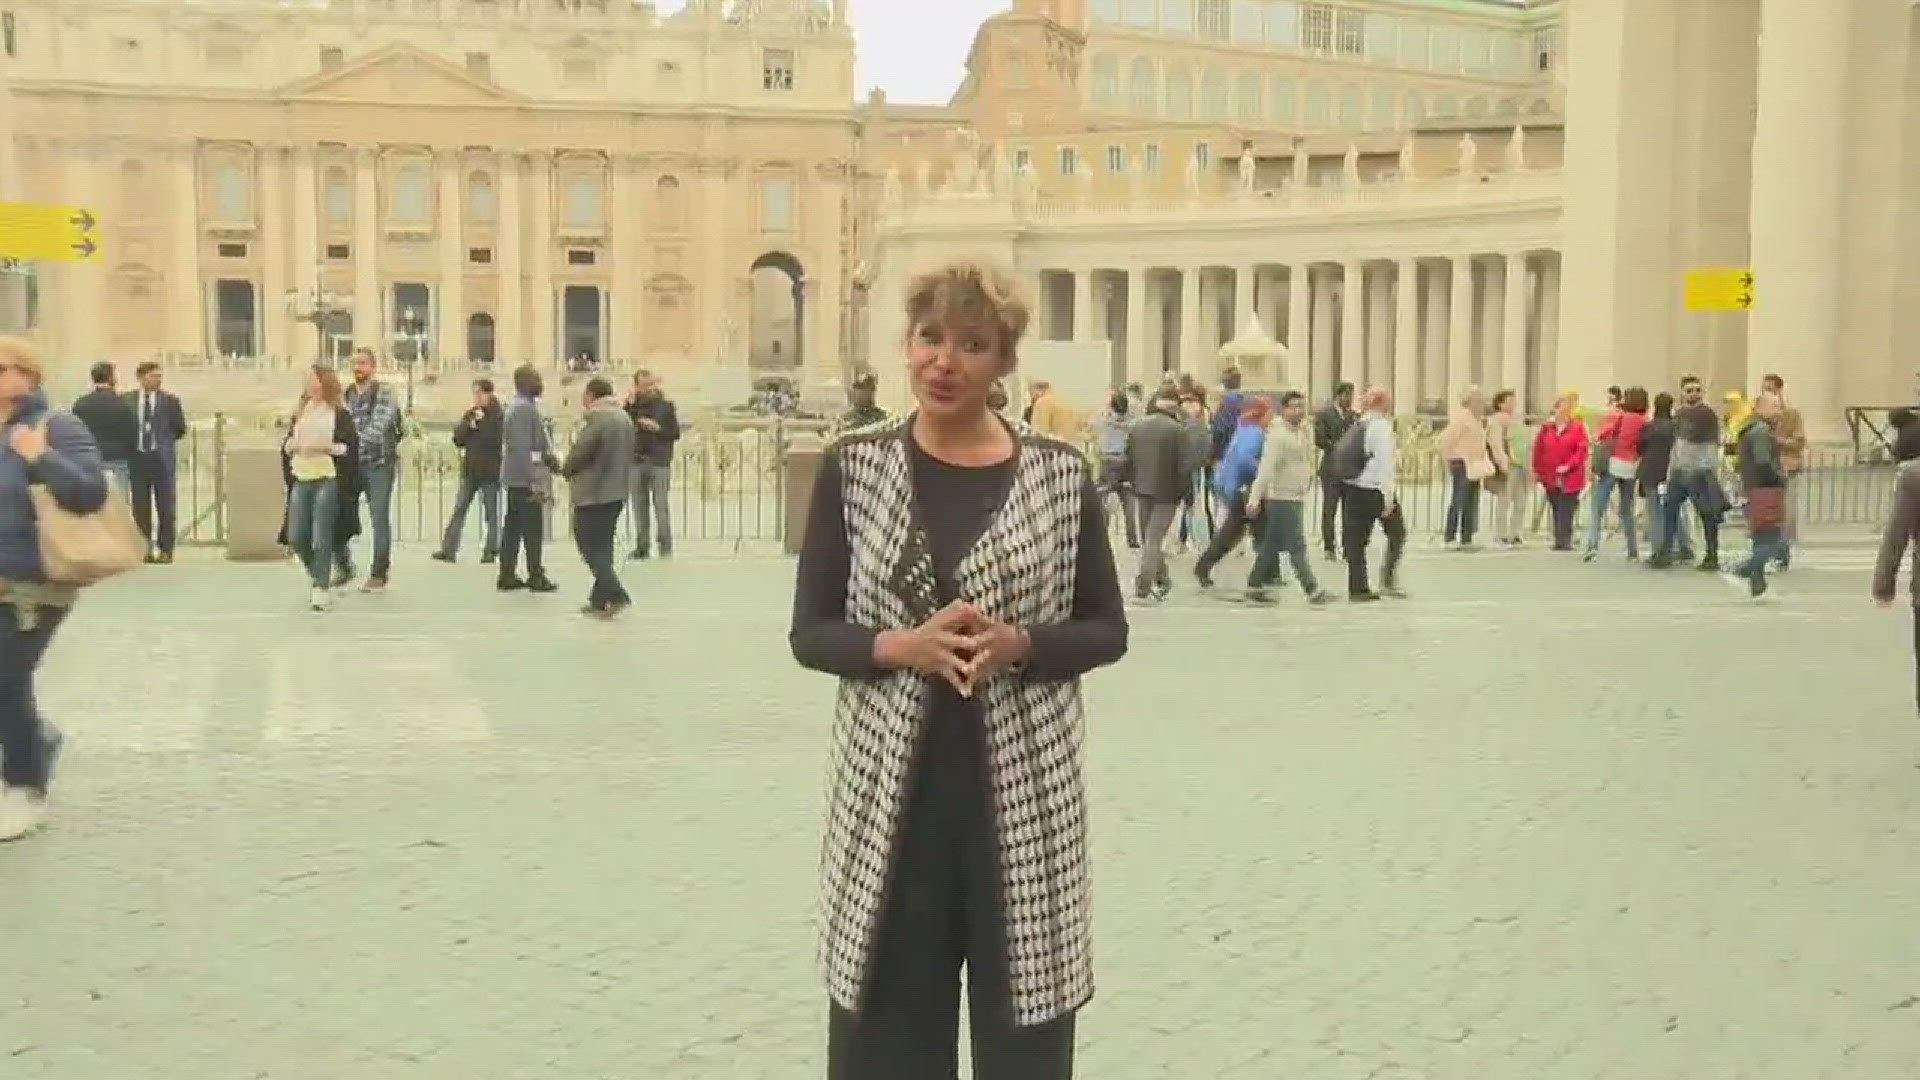 An International Scientific Conference is being held at the Vatican in partnership with Stem for Life. Sally-Ann Roberts and her sister Robin were invited because they have seen firsthand the lifesaving impact of a bone marrow transplant.